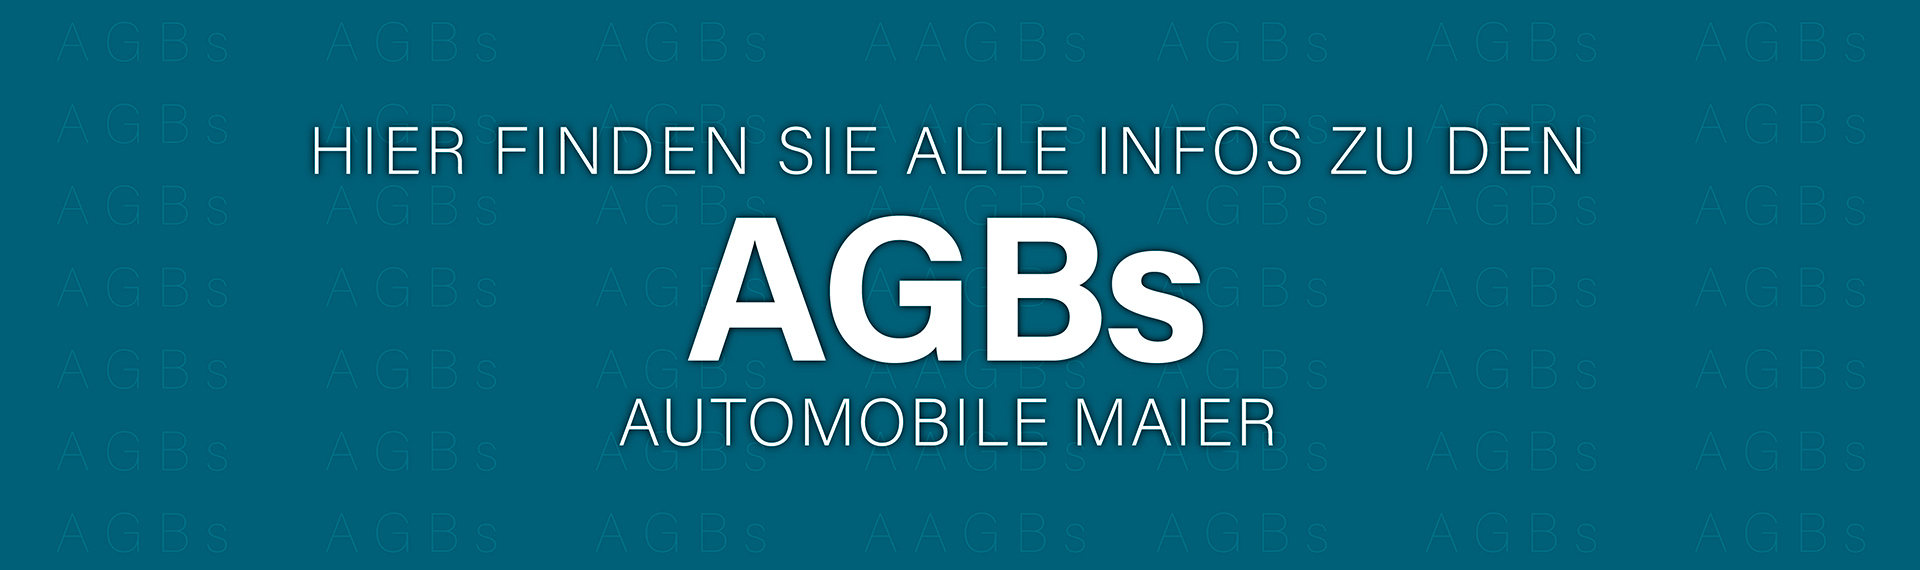 AGB´s Automobile Maier 